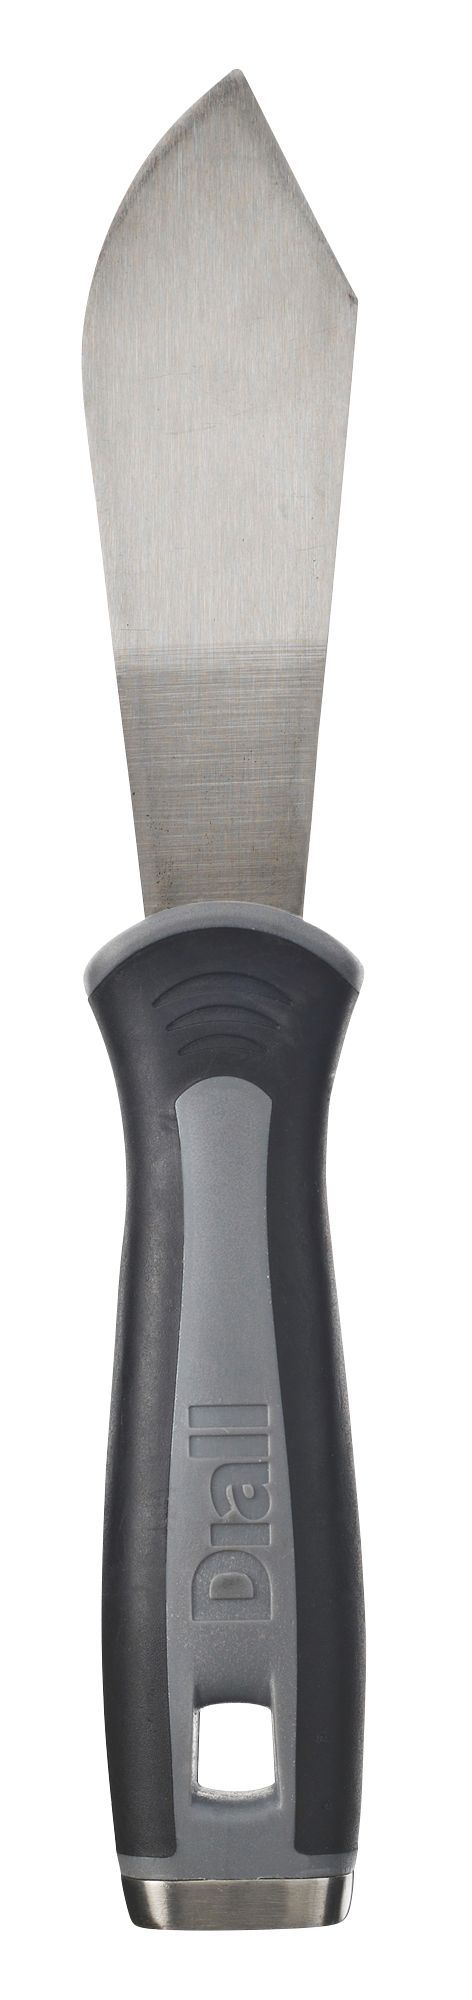 Diall 1.3" Putty knife